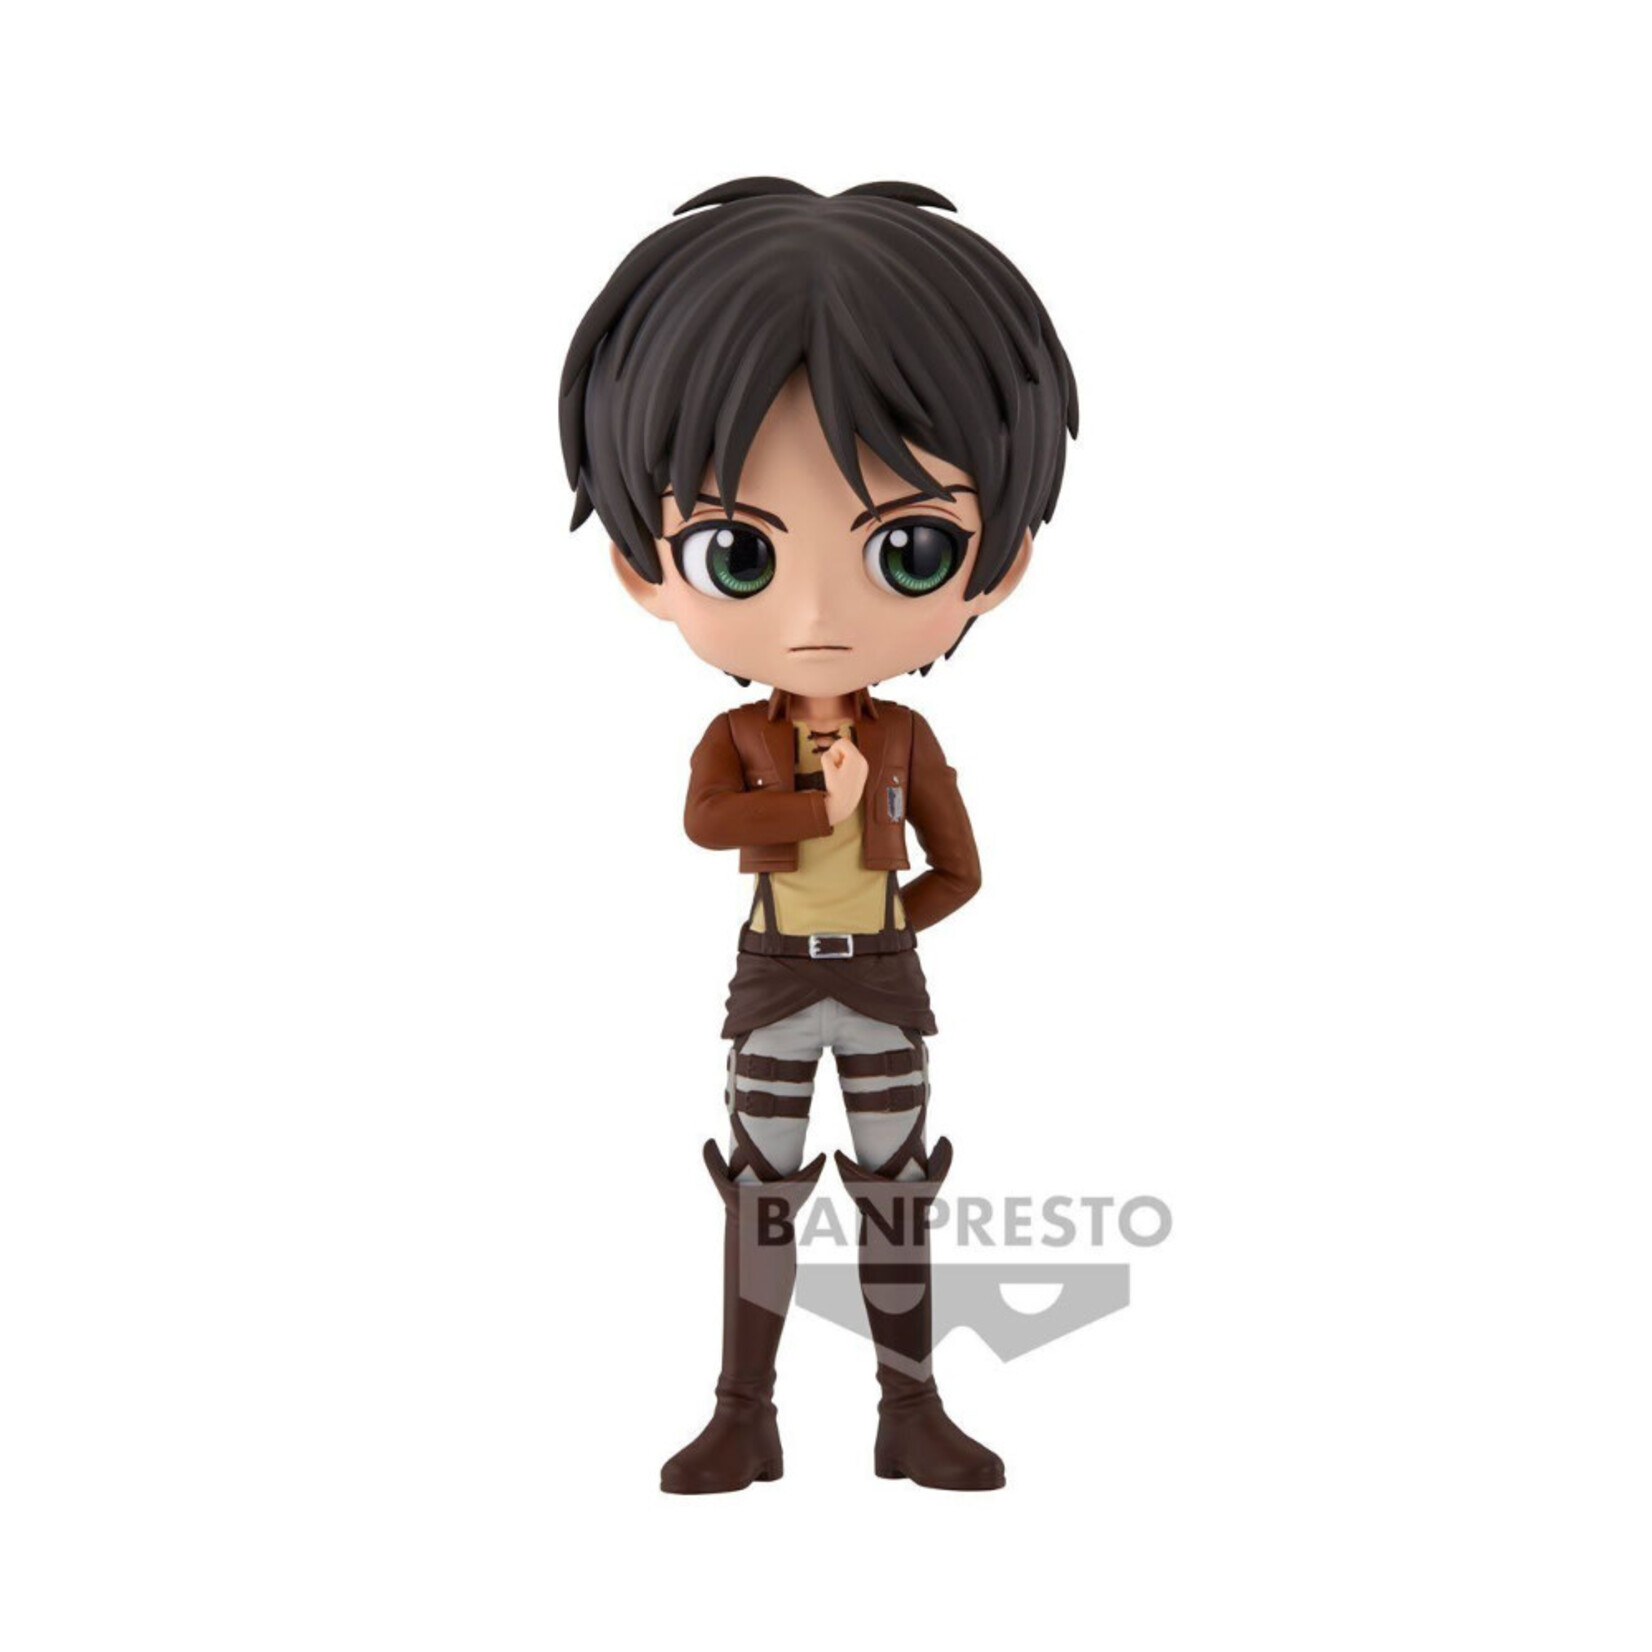 BANDAI Q POSKET ATTACK ON TITAN EREN YEAGER FIGURE (A)